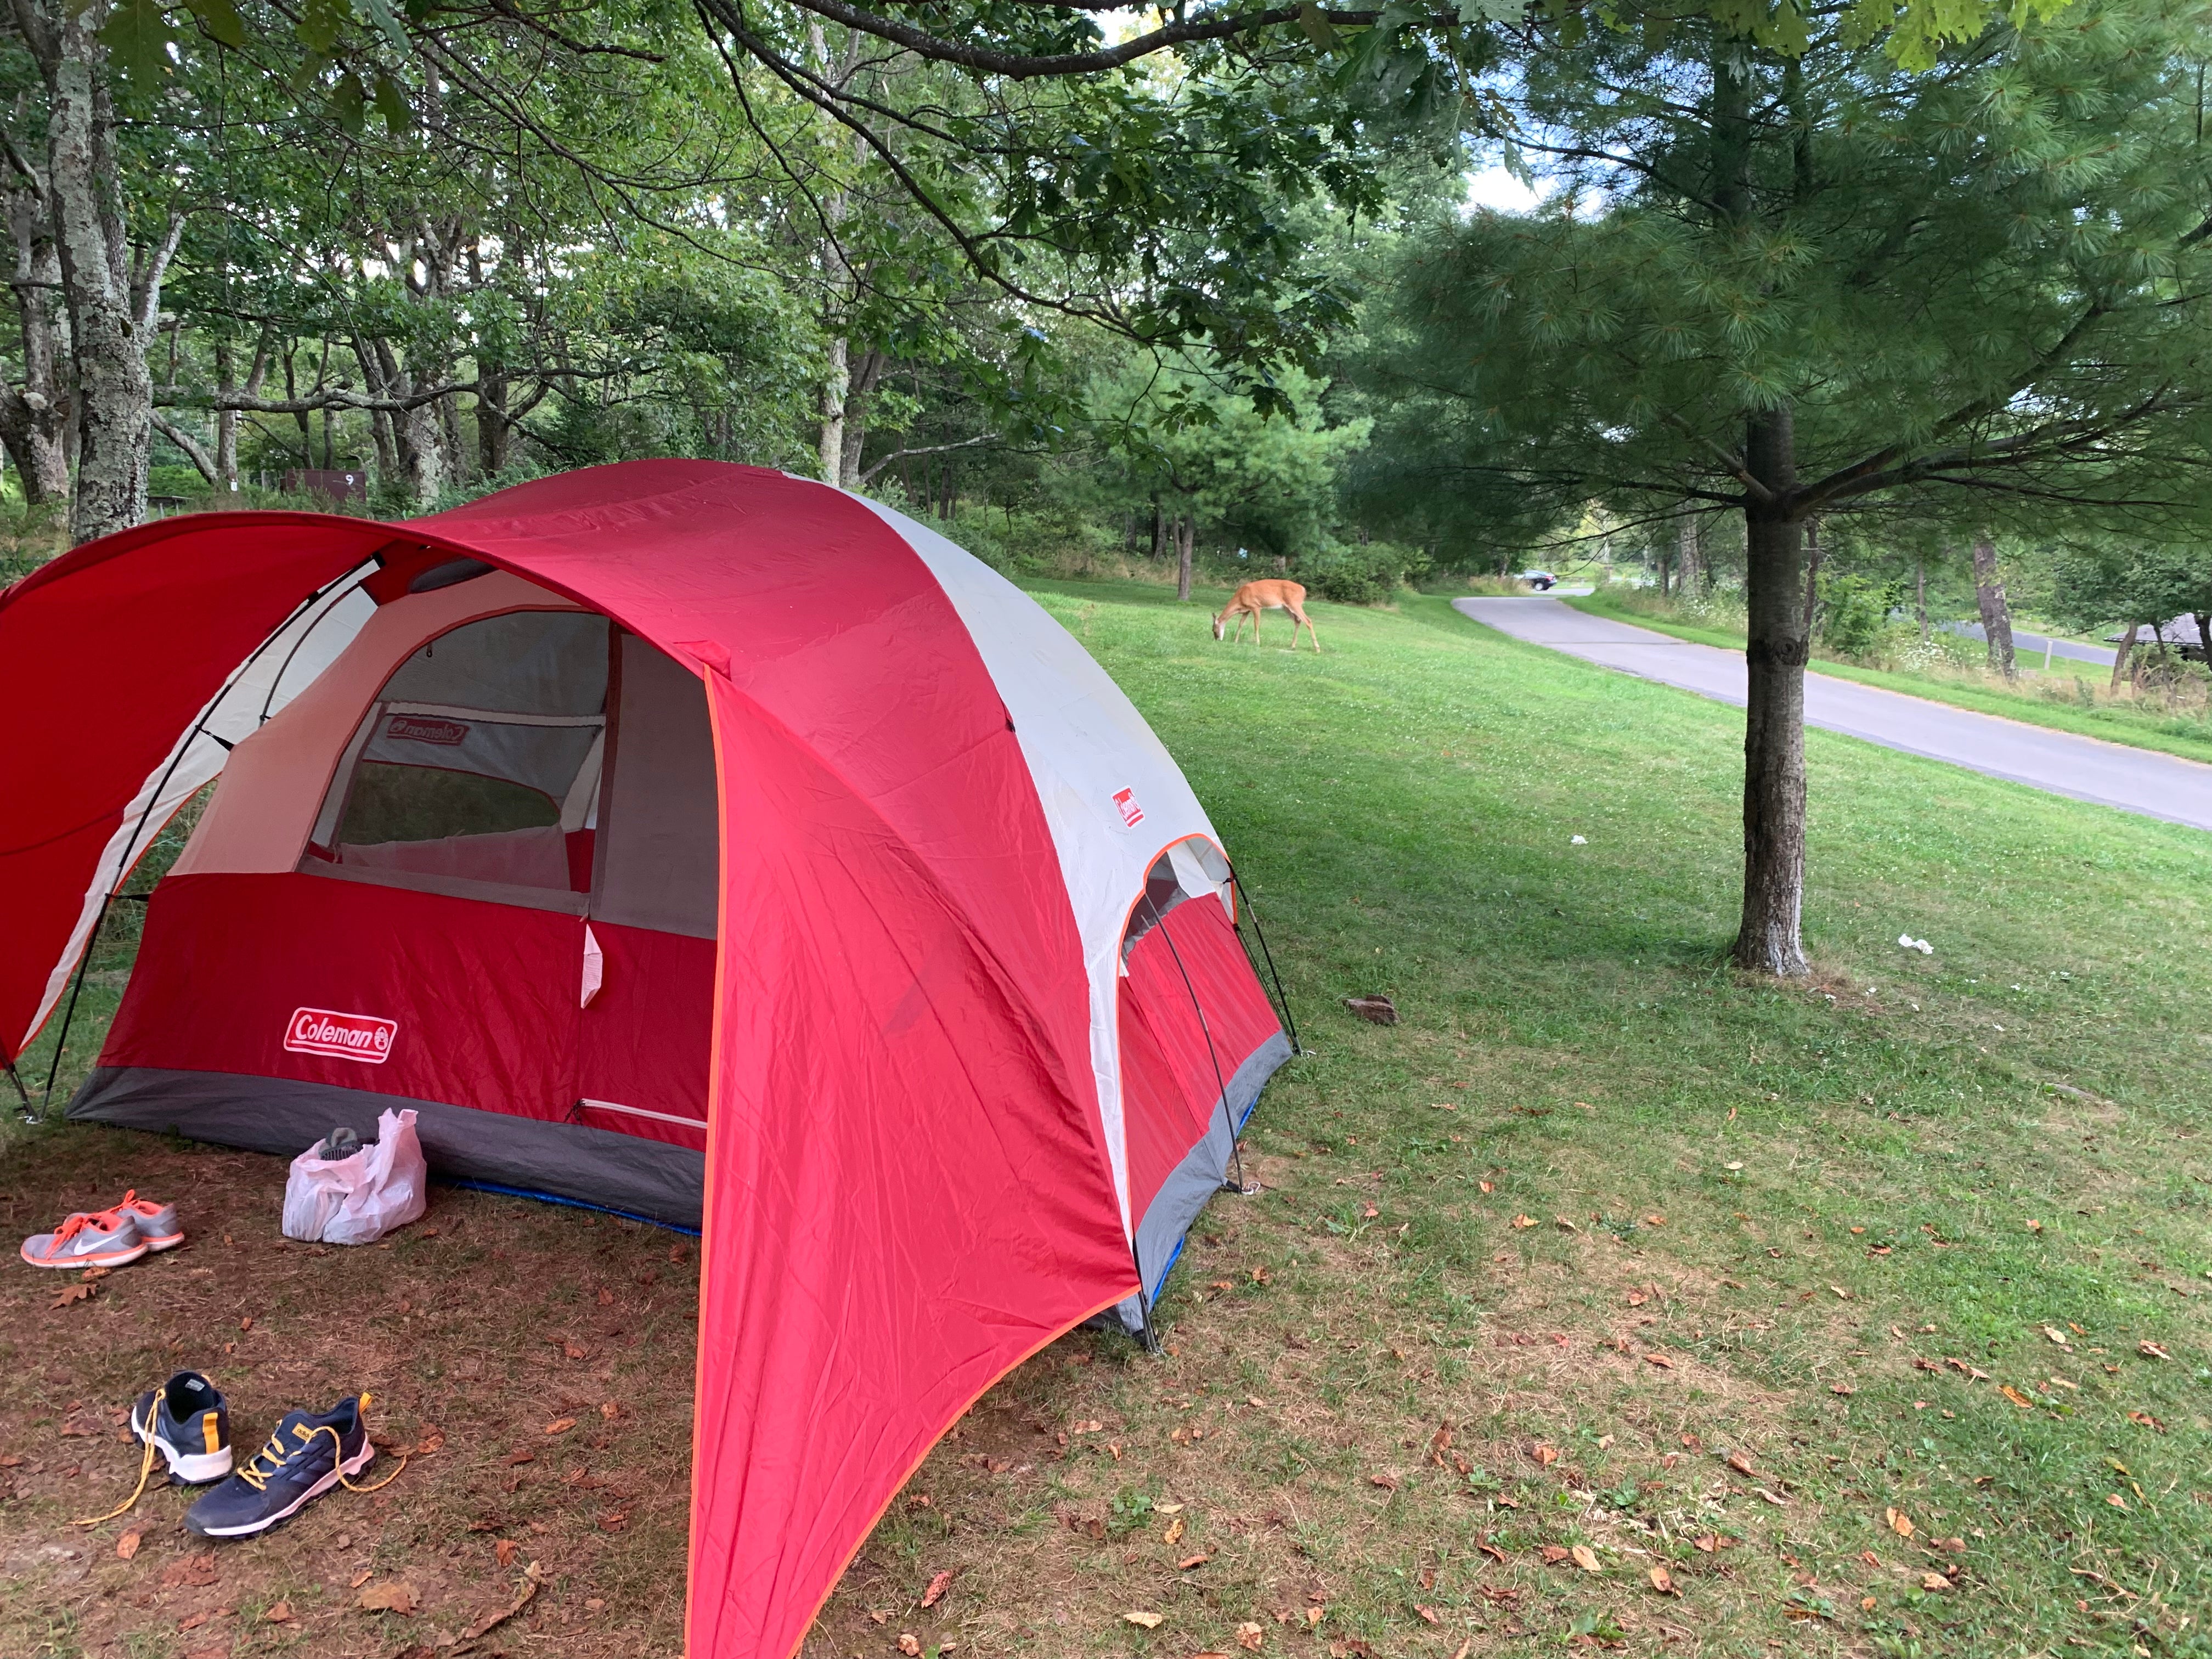 Tent had to be pitched at a slight angle (due to the site)

Also bonus deer in the background